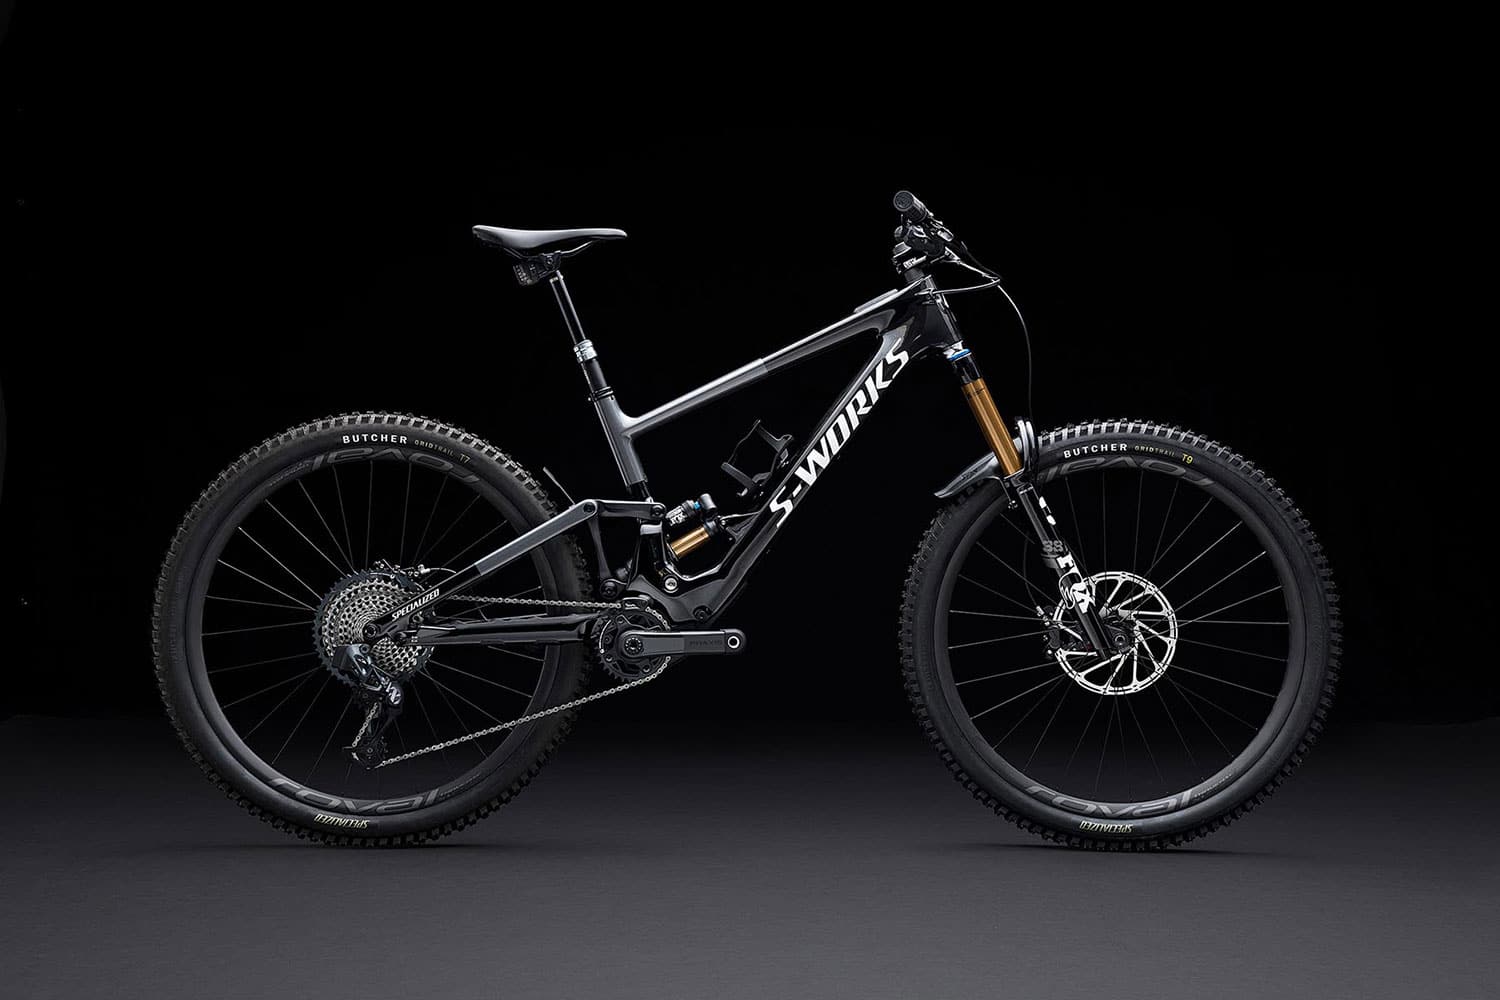 Specialized Turbo Kenevo SL e-MTB is lighter and more capable